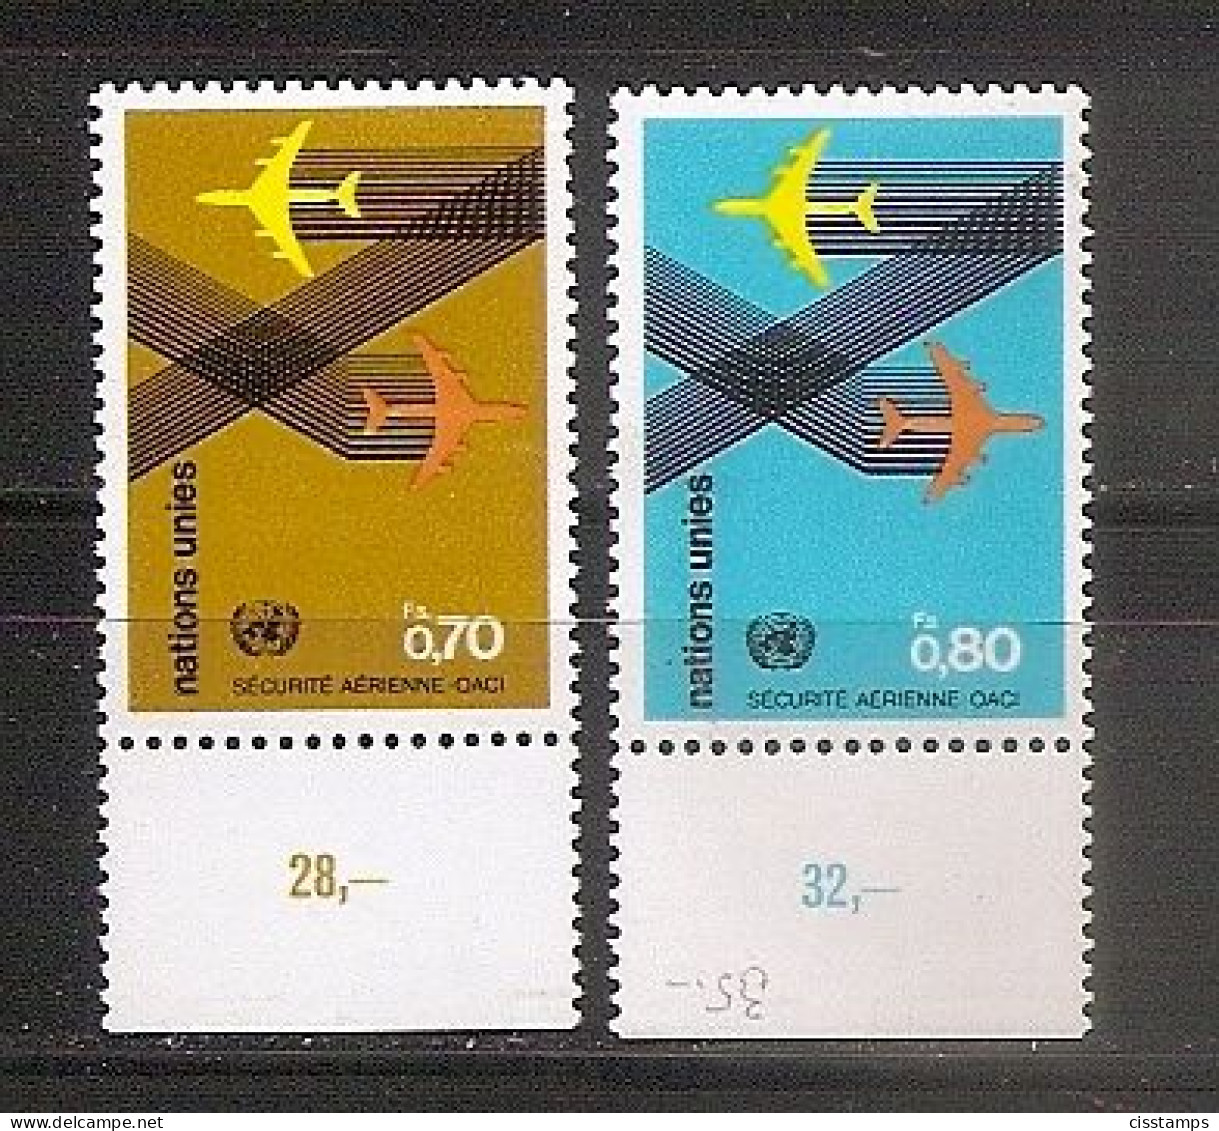 UNITED NATIONS GENEVA 1978●ICAO Safety In The Air●Mi 76-77●MNH - Nuevos